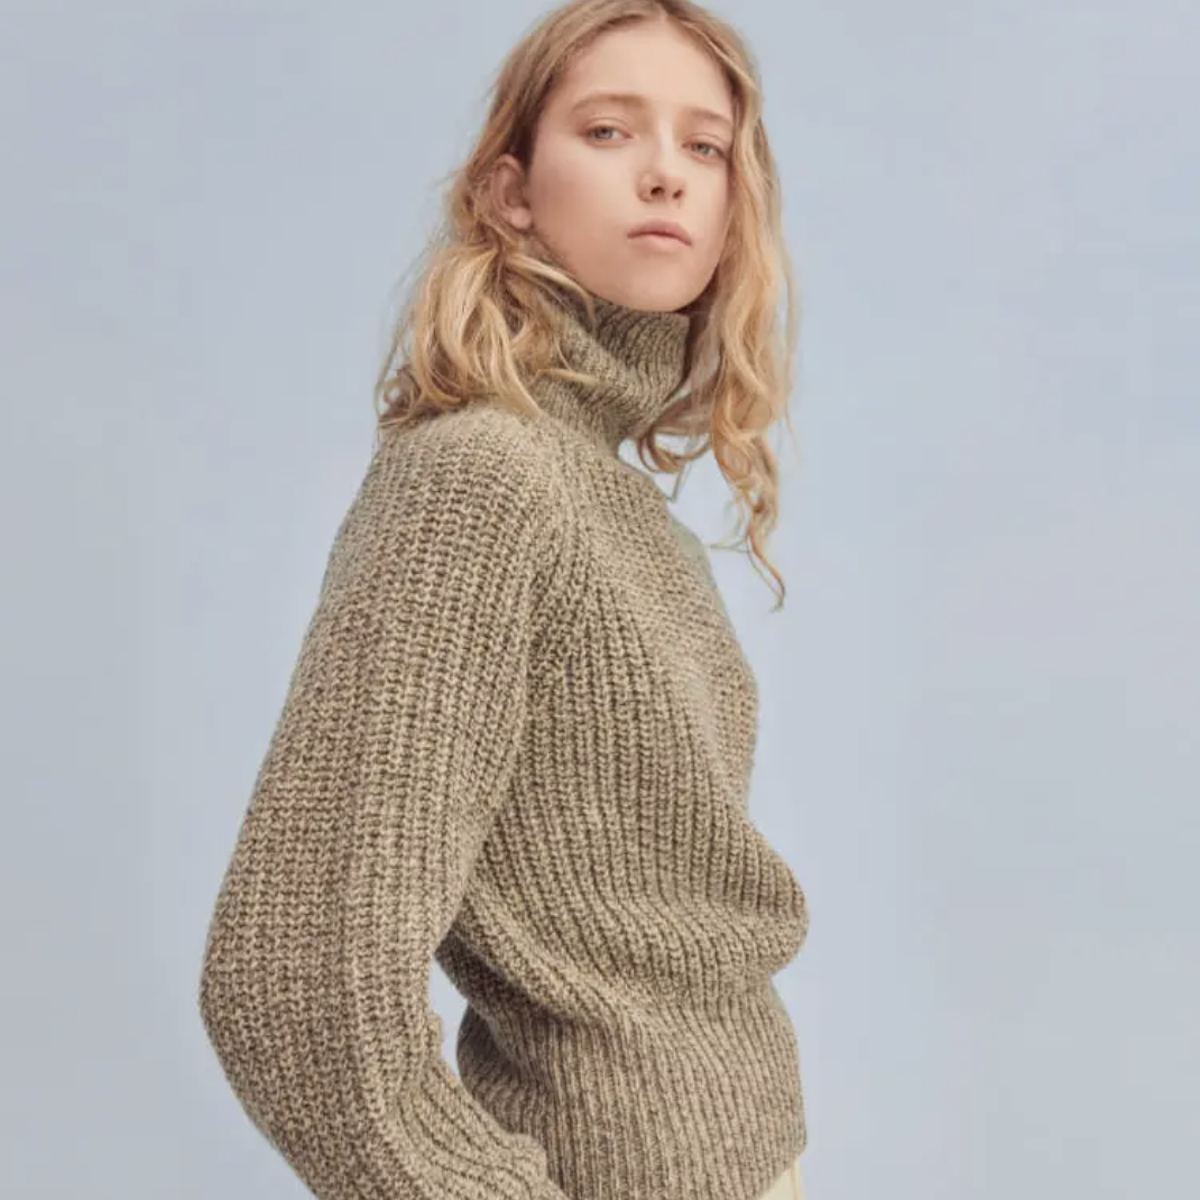 🎄Winter Essentials From Uniqlo, Gallery posted by Saaaraaa